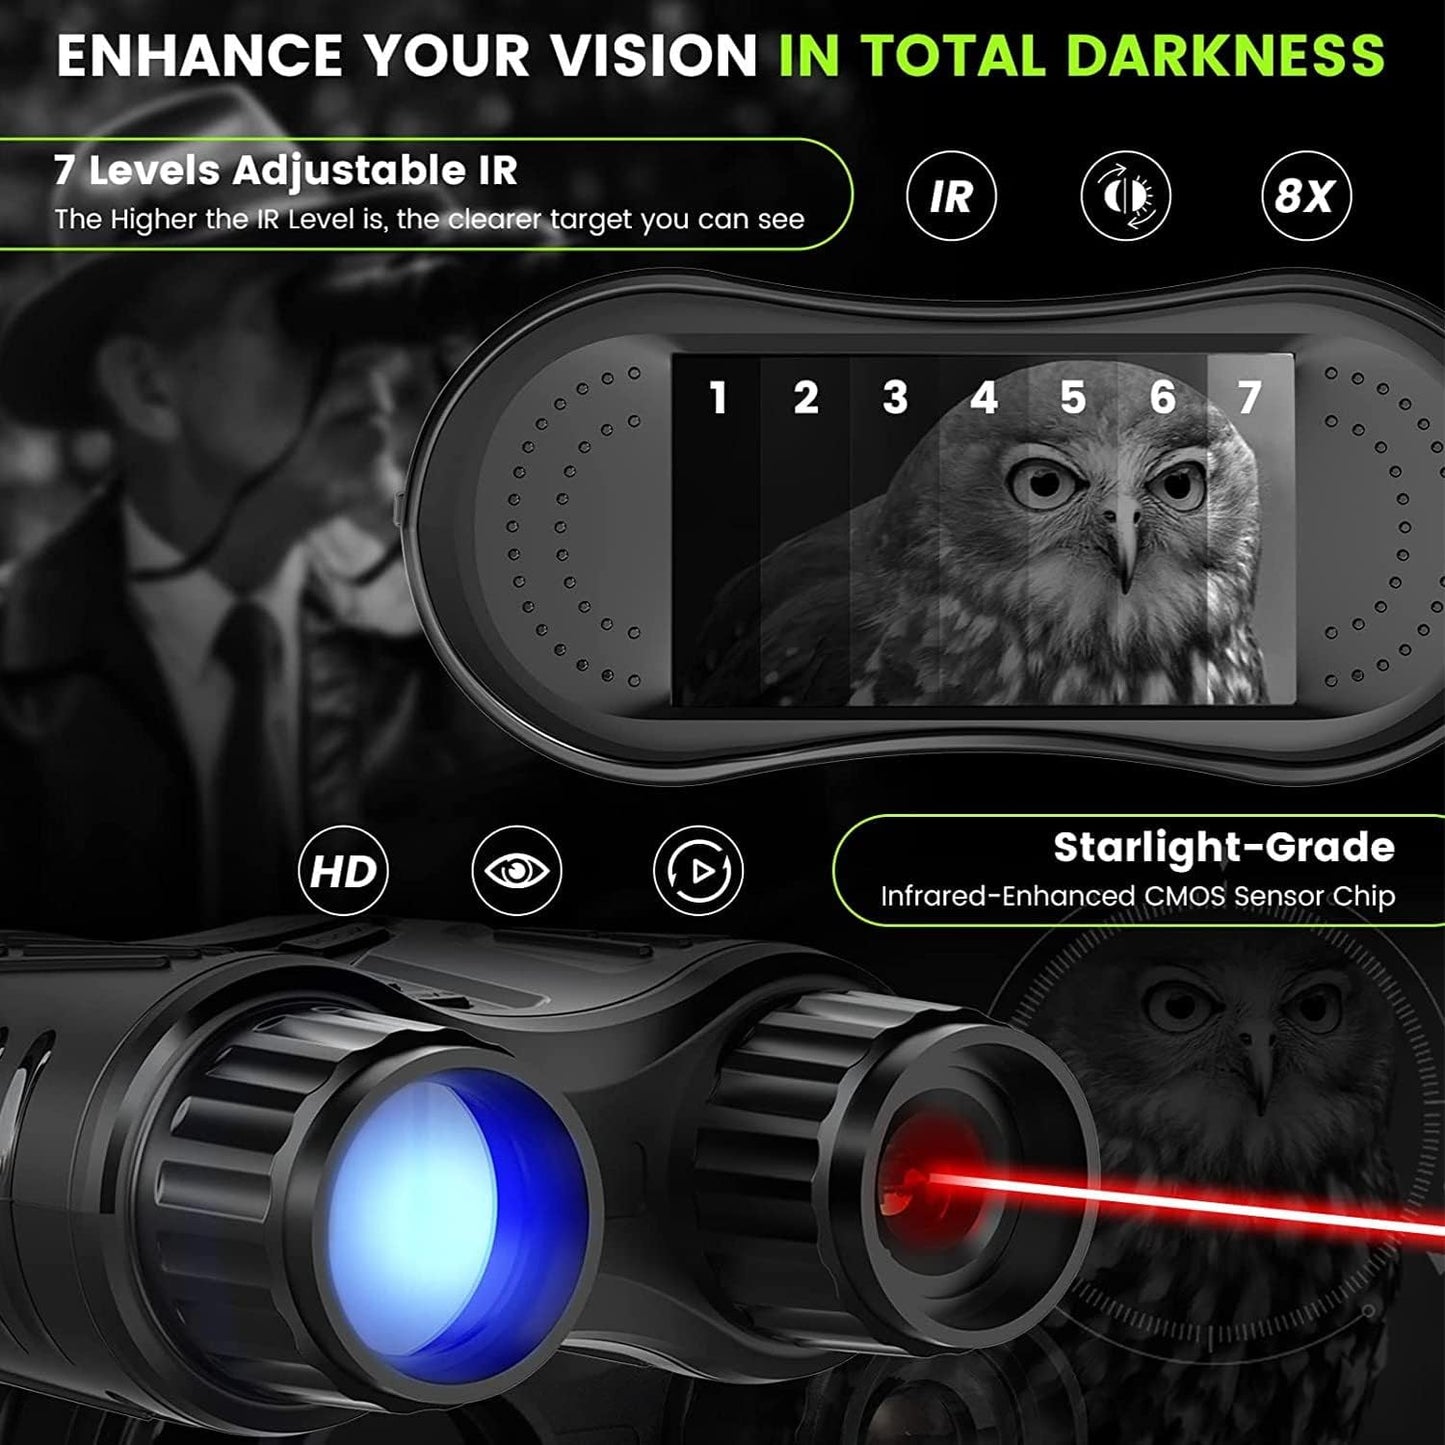 COOLBABY WQSJ005 Binocular Infrared Night Vision Telescope,8x Digital Zoom 4K Video,3.2'' Screen Tactical Gear for Hunting & Security,32GB Card - COOLBABY